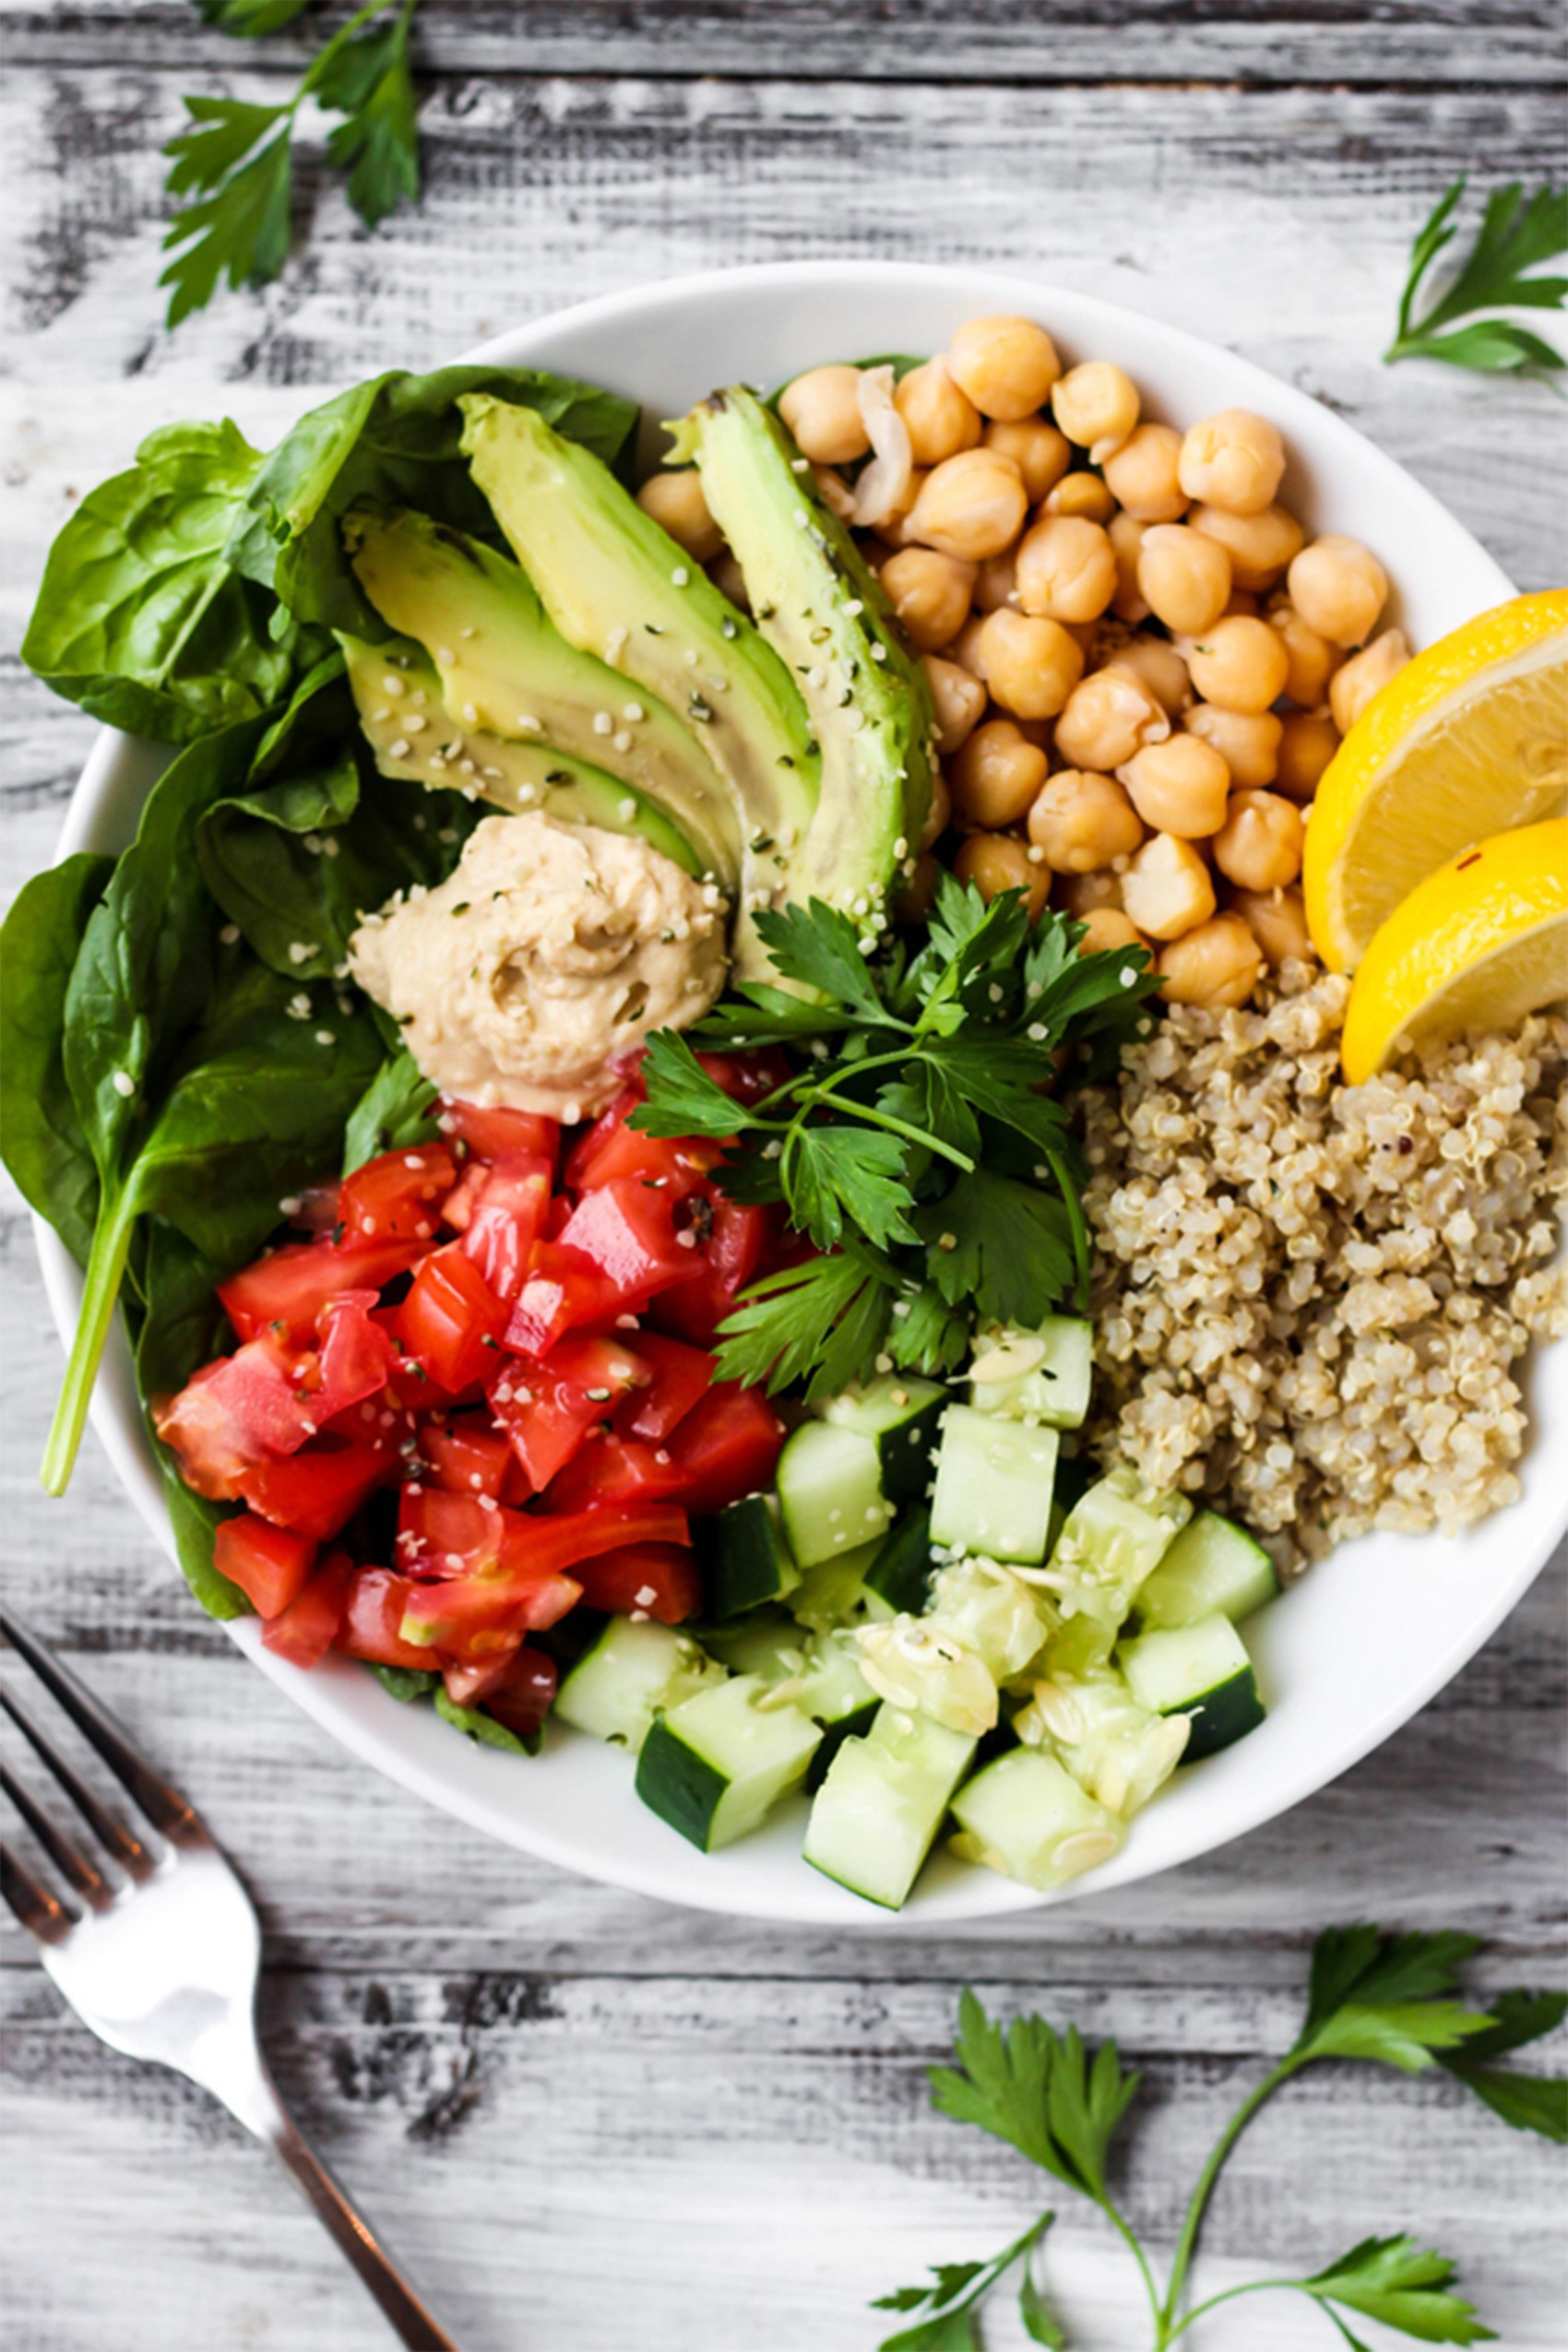 a bowl with greens, tomatoes, cucumber, quinoa, chickpeas, avocado, hummus, parsley and lemon wedges